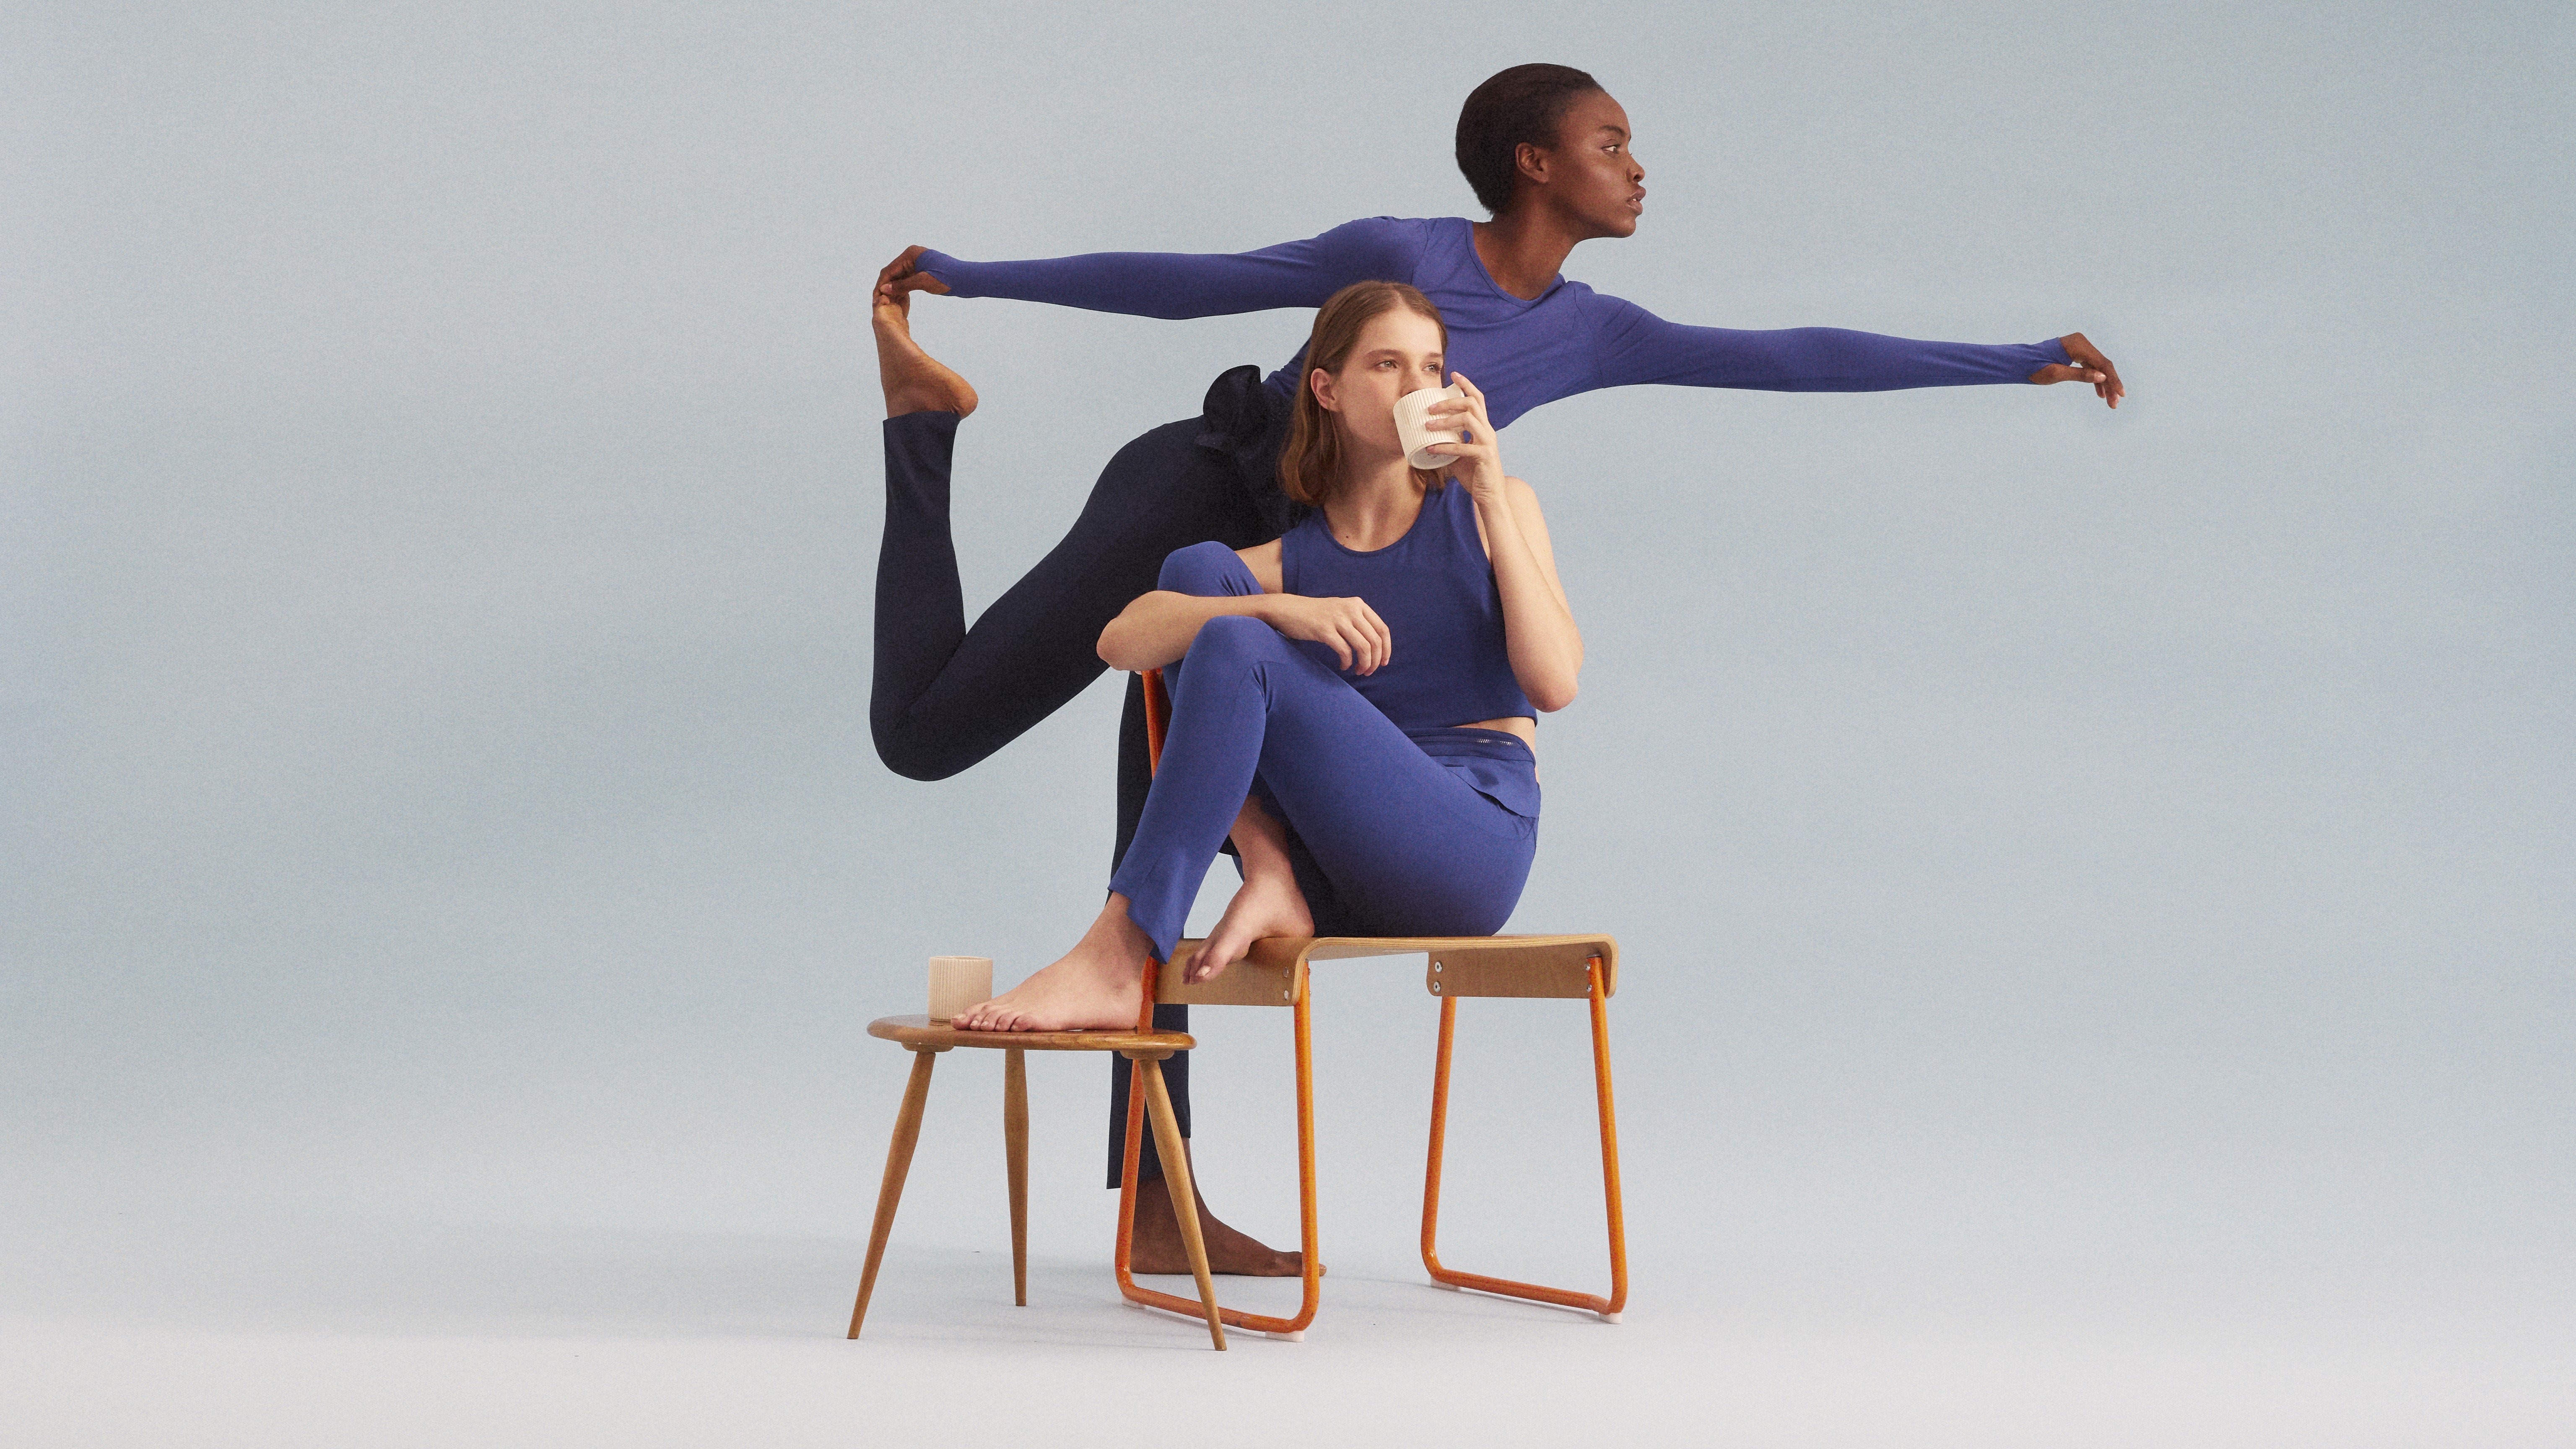 Wear the same clothes from morning yoga to evening cocktails – new concept  in active wear from London fashion label